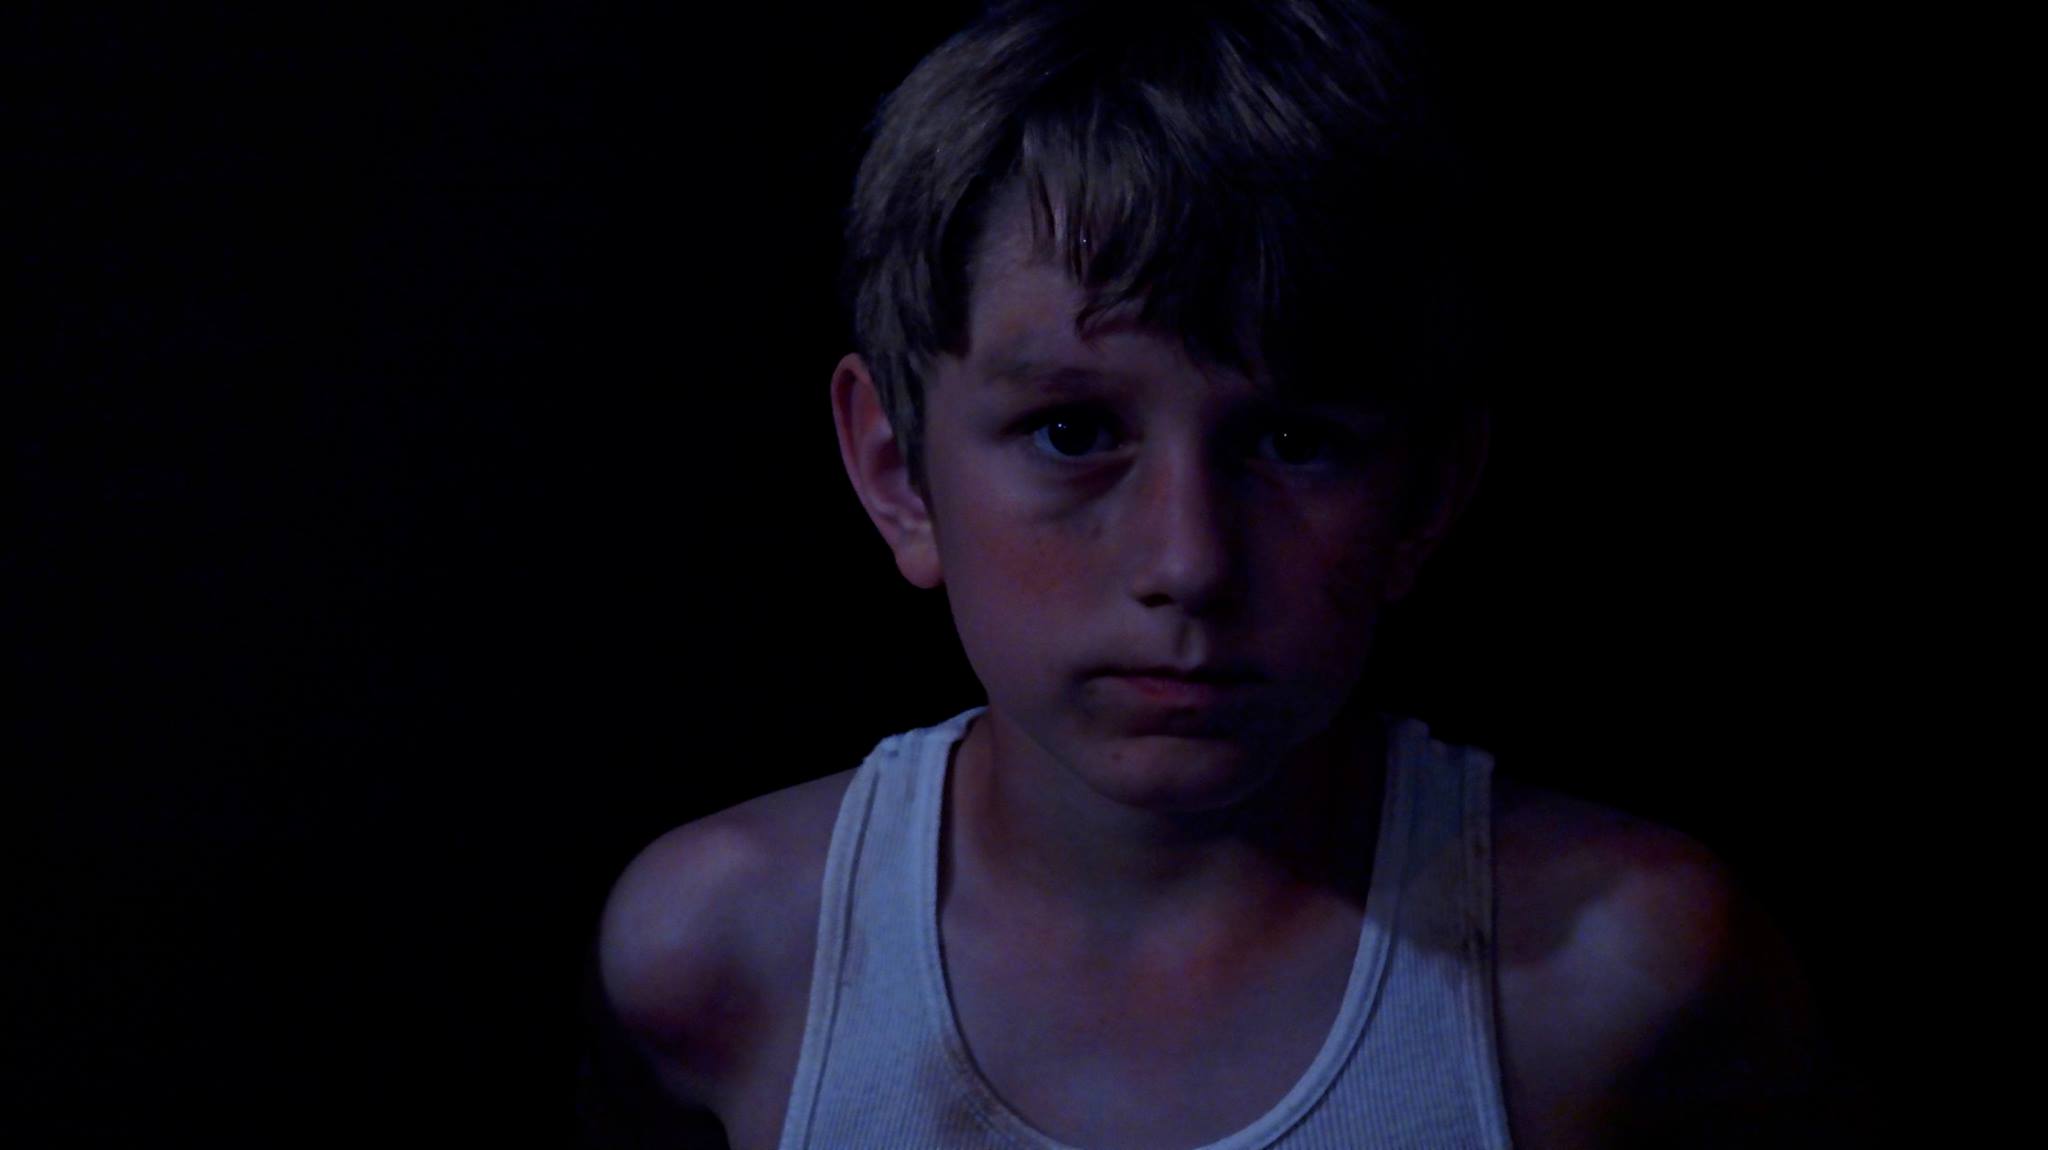 Still from Into the Dark - A Project Greenlight submission